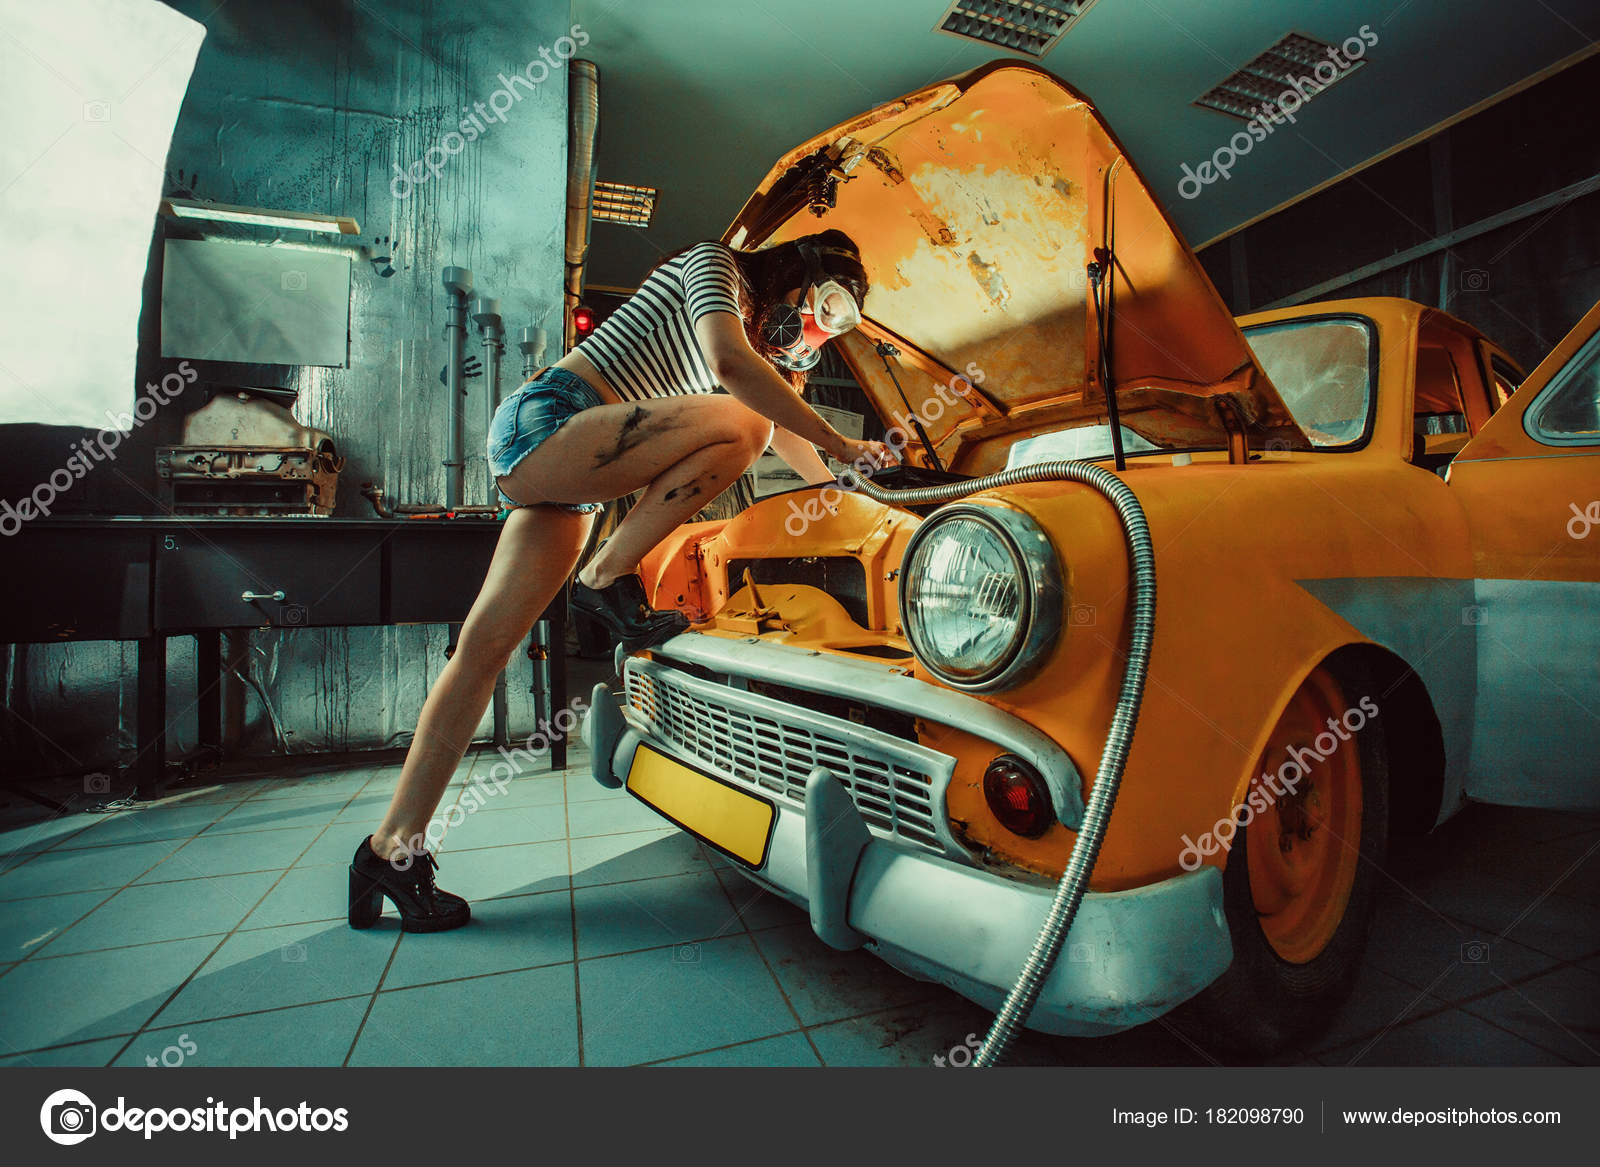 Xxx Sex Bumper And Sexy Car - Sexy Woman Is Welding Something Inside An Old Car Stock 32230 | Hot Sex  Picture